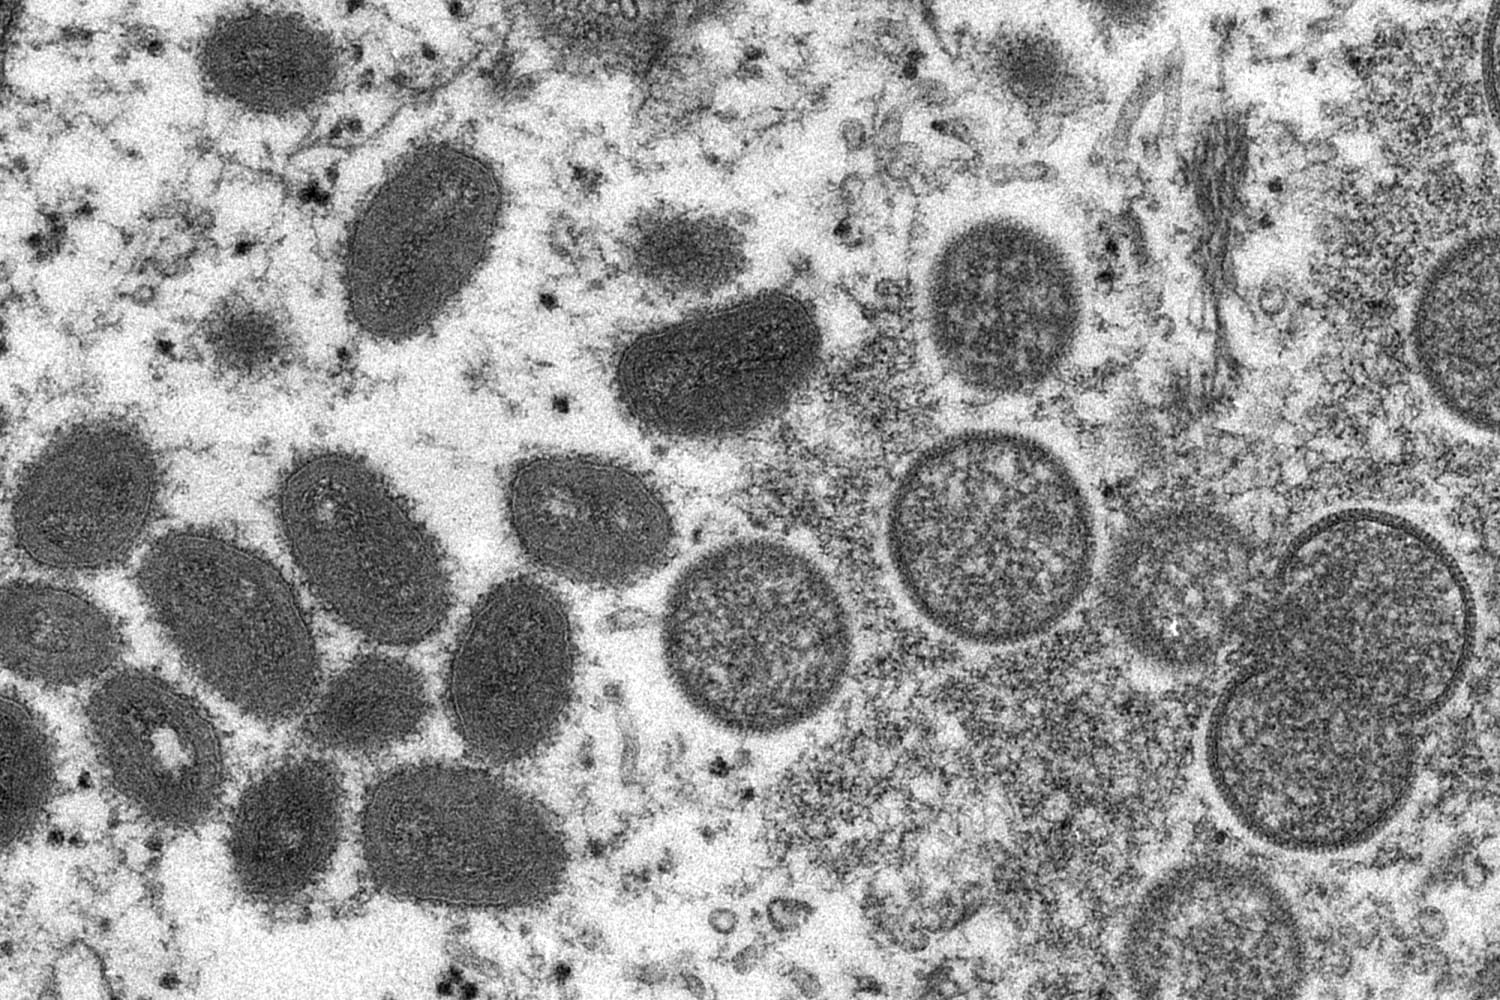 Two distinct monkeypox variants found in U.S., adding to outbreak's mystery